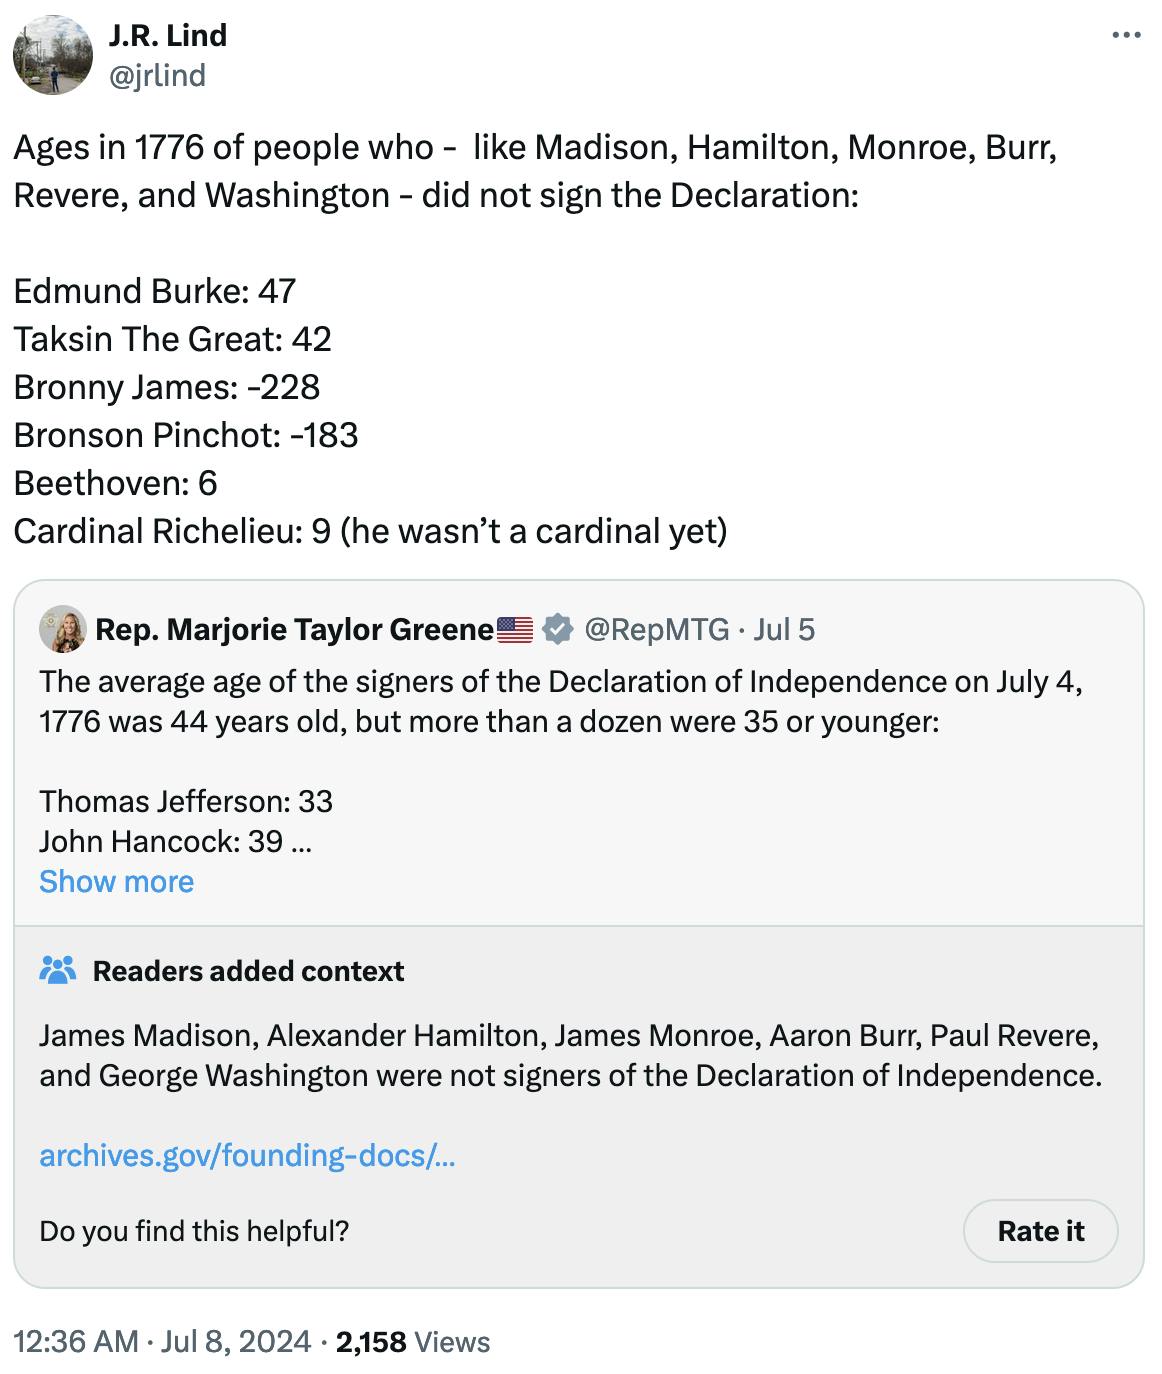 Tweet screenshot J.R. Lind @jrlind: Ages in 1776 of people who - like Madison, Hamilton, Monroe, Burr, Revere, and Washington - did not sign the Declaration: Edmund Burke: 47 Taksin The Great: 42 Bronny James: -228 Bronson Pinchot: -183 Beethoven: 6 Cardinal Richelieu: 9 (he wasn’t a cardinal yet)